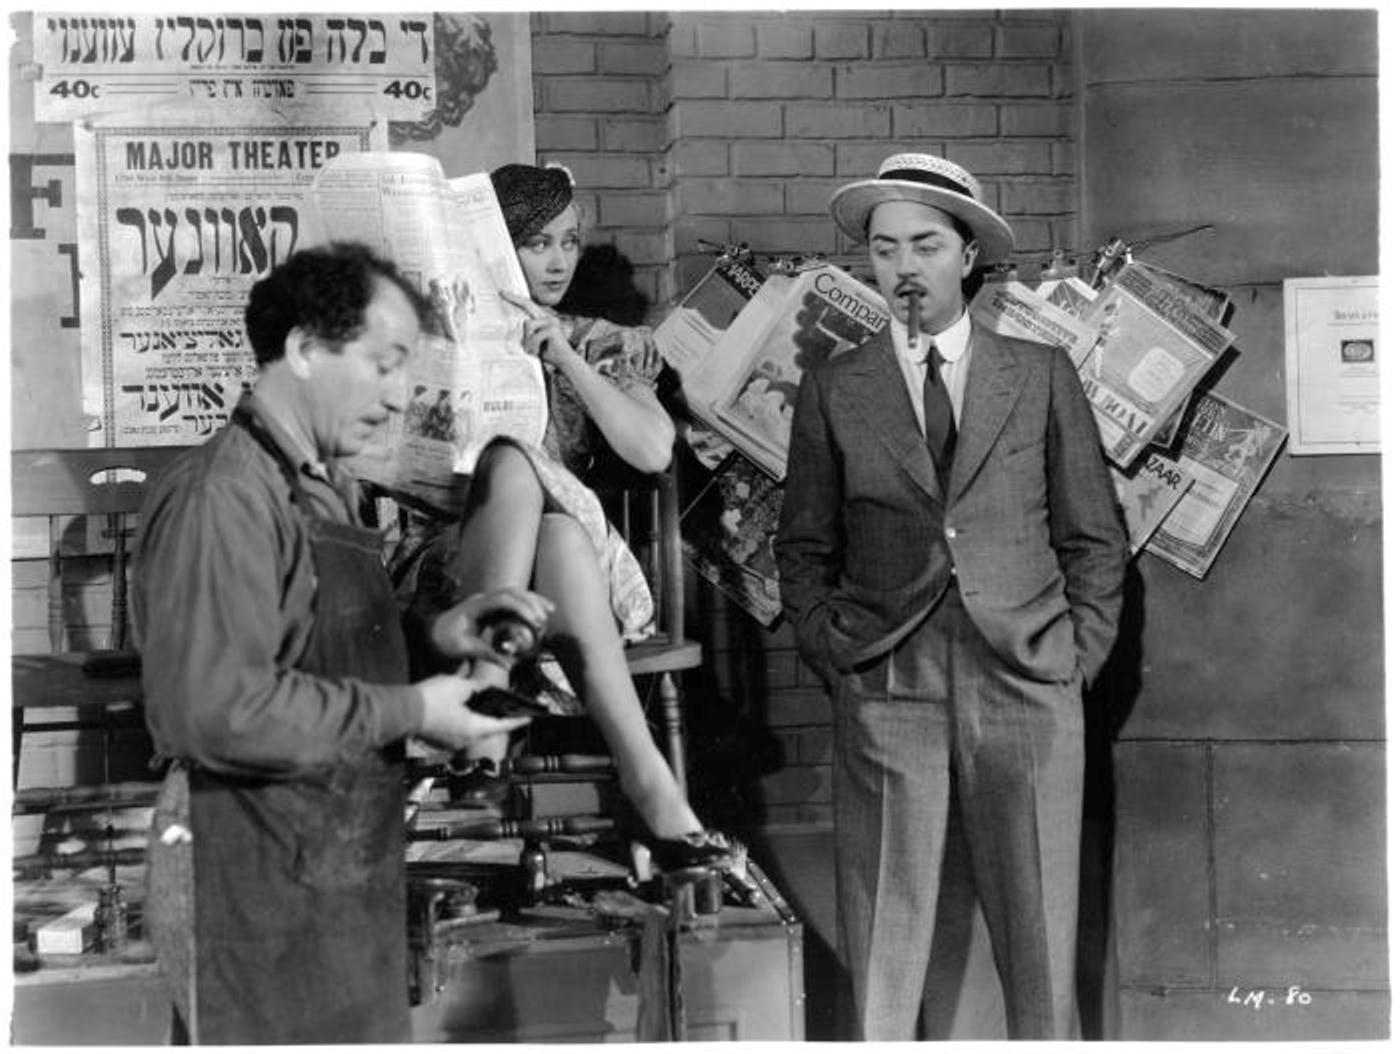 Here we have Armand Wright, Joan Blondell, & William Powell from 1932's Lawyer Man.